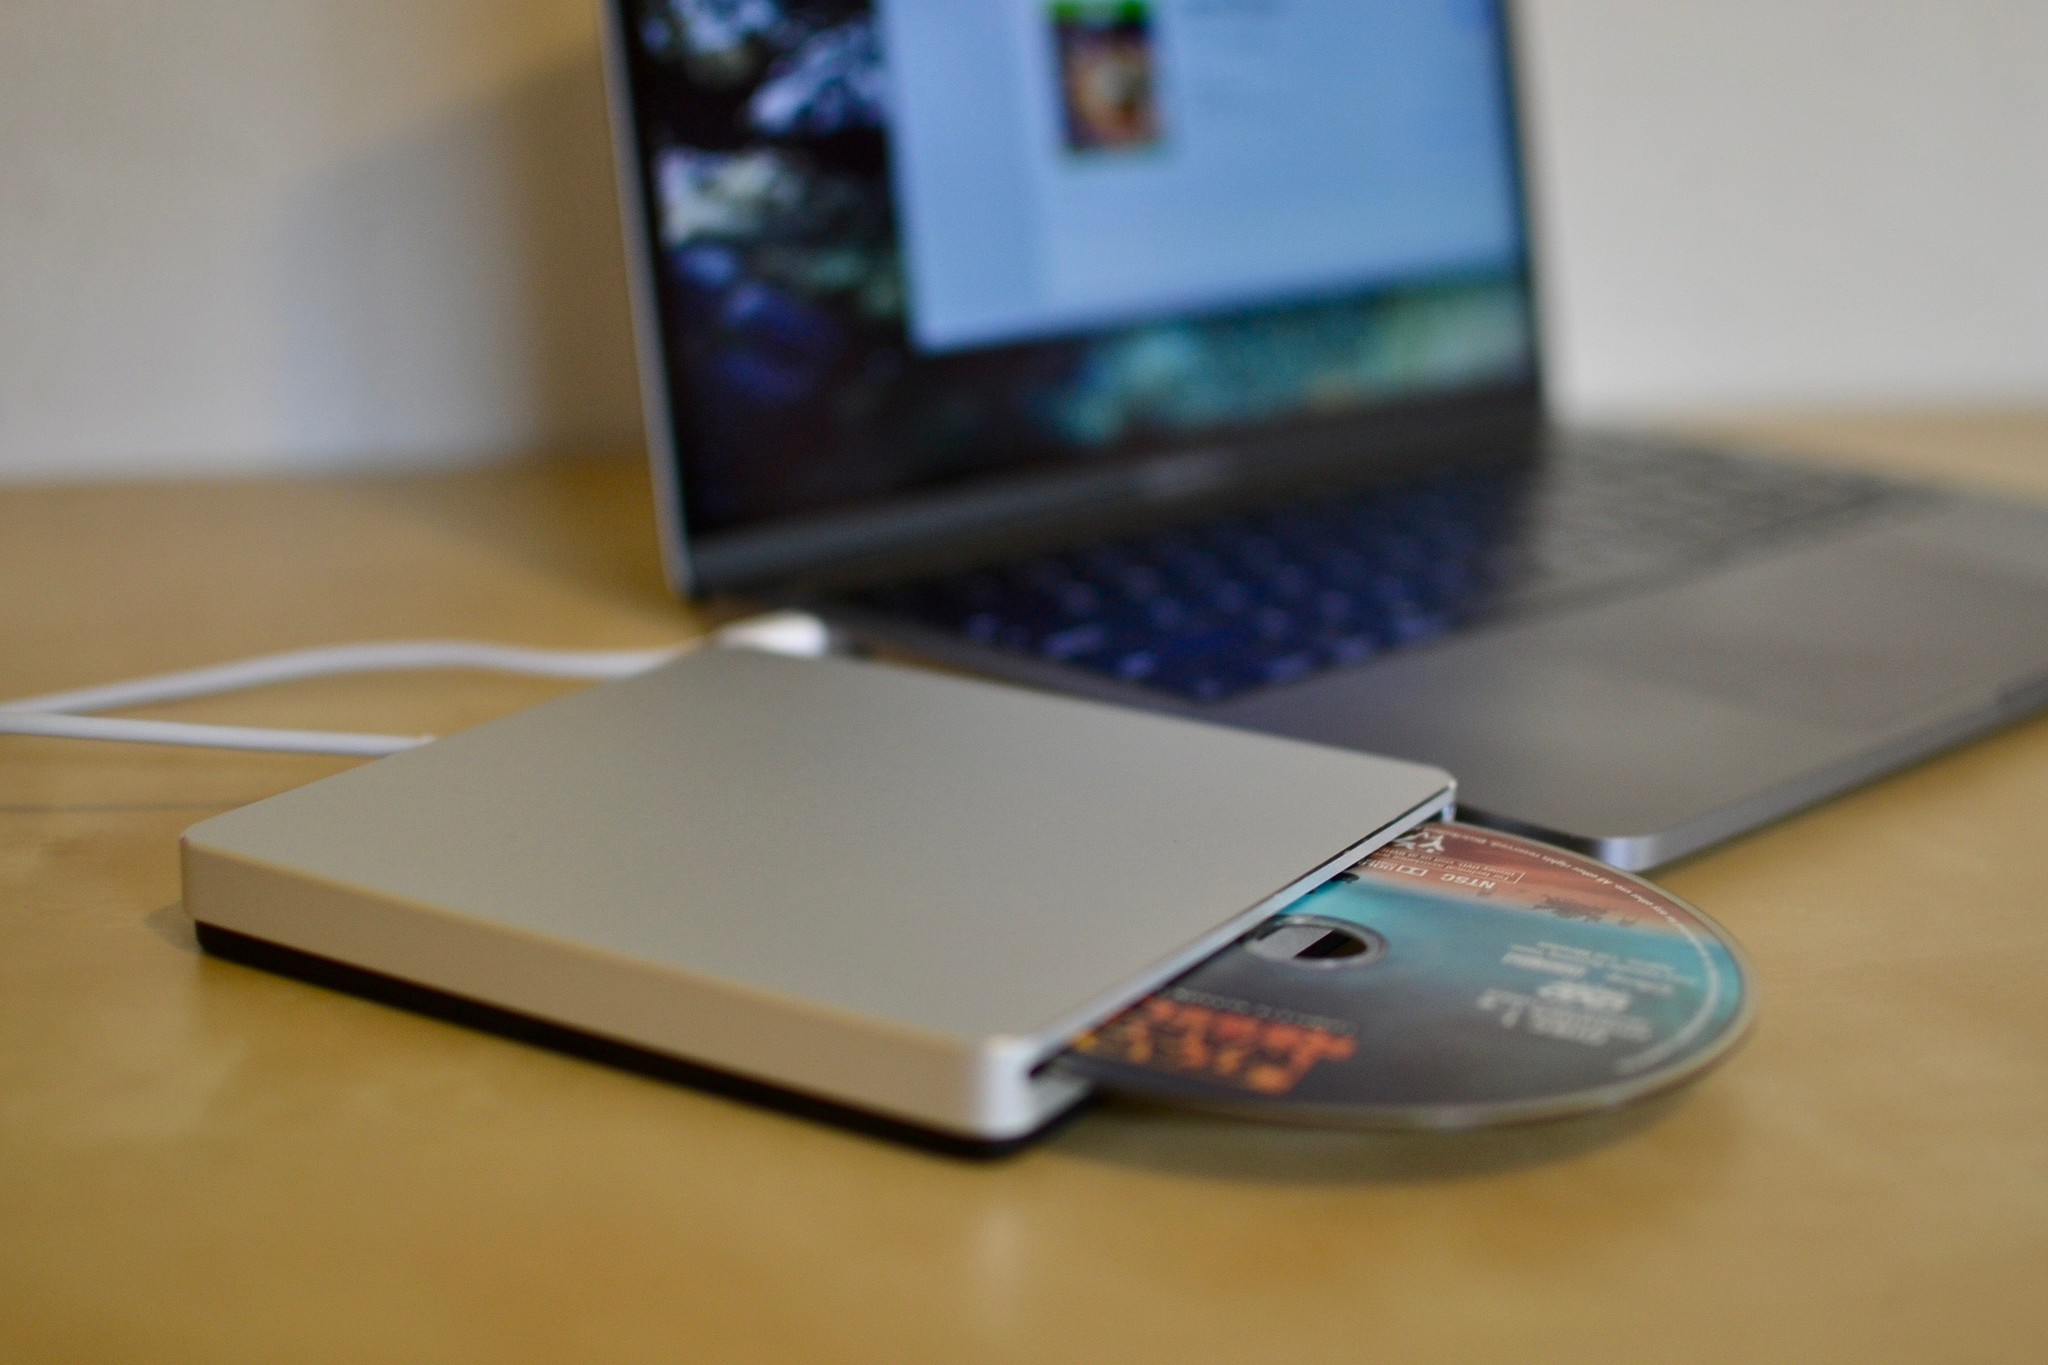 What Is The Best External Cd Drive For Mac